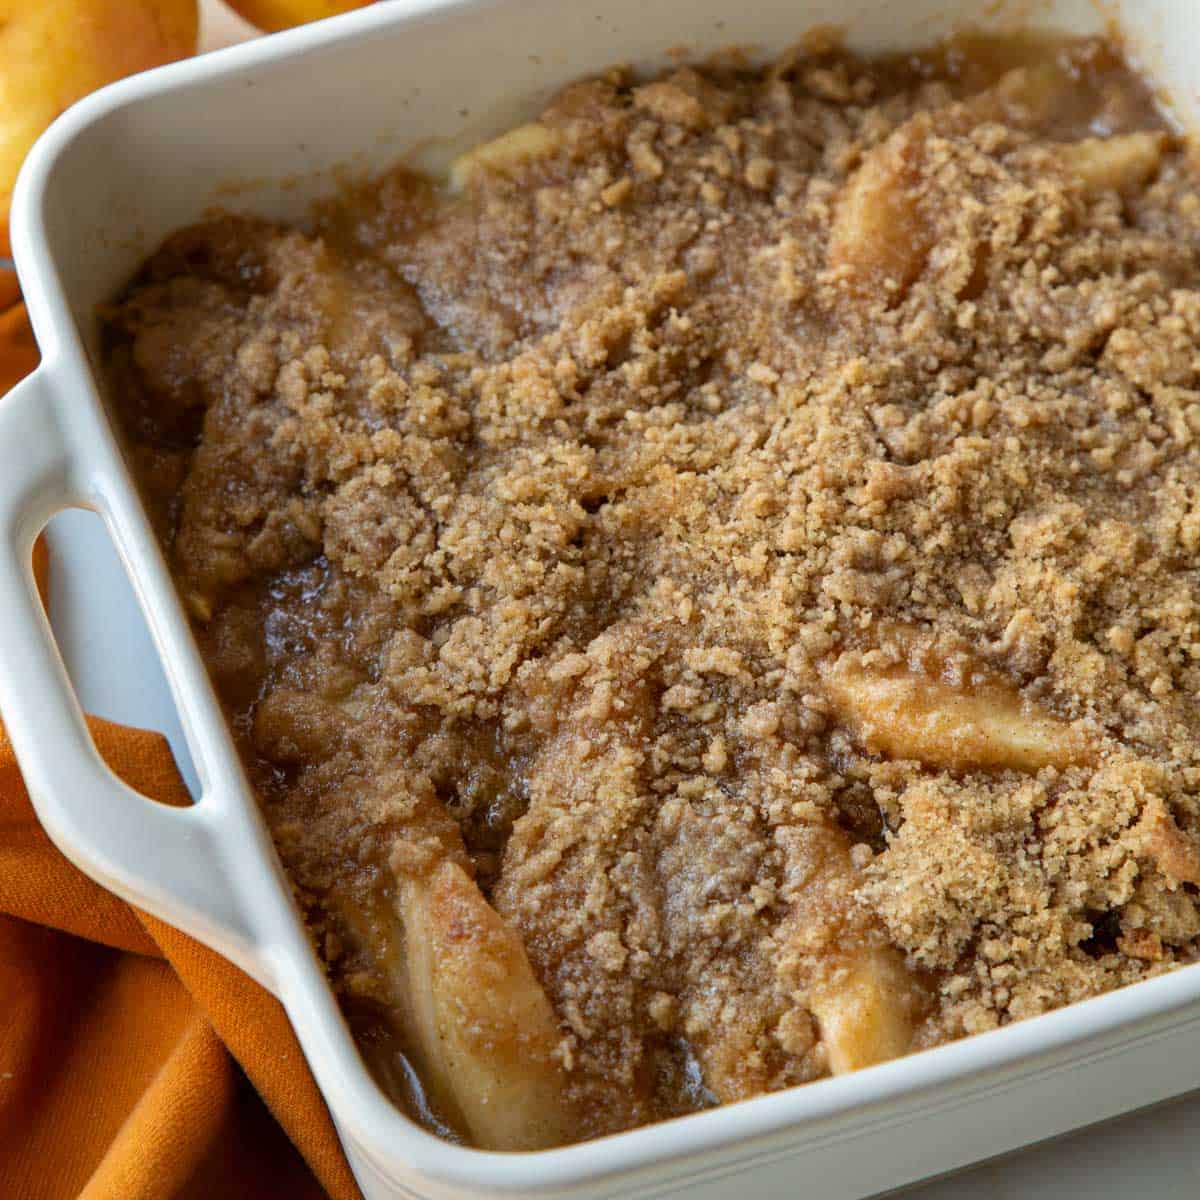 Top view of a baked Pear Crumble in a white baking dish.